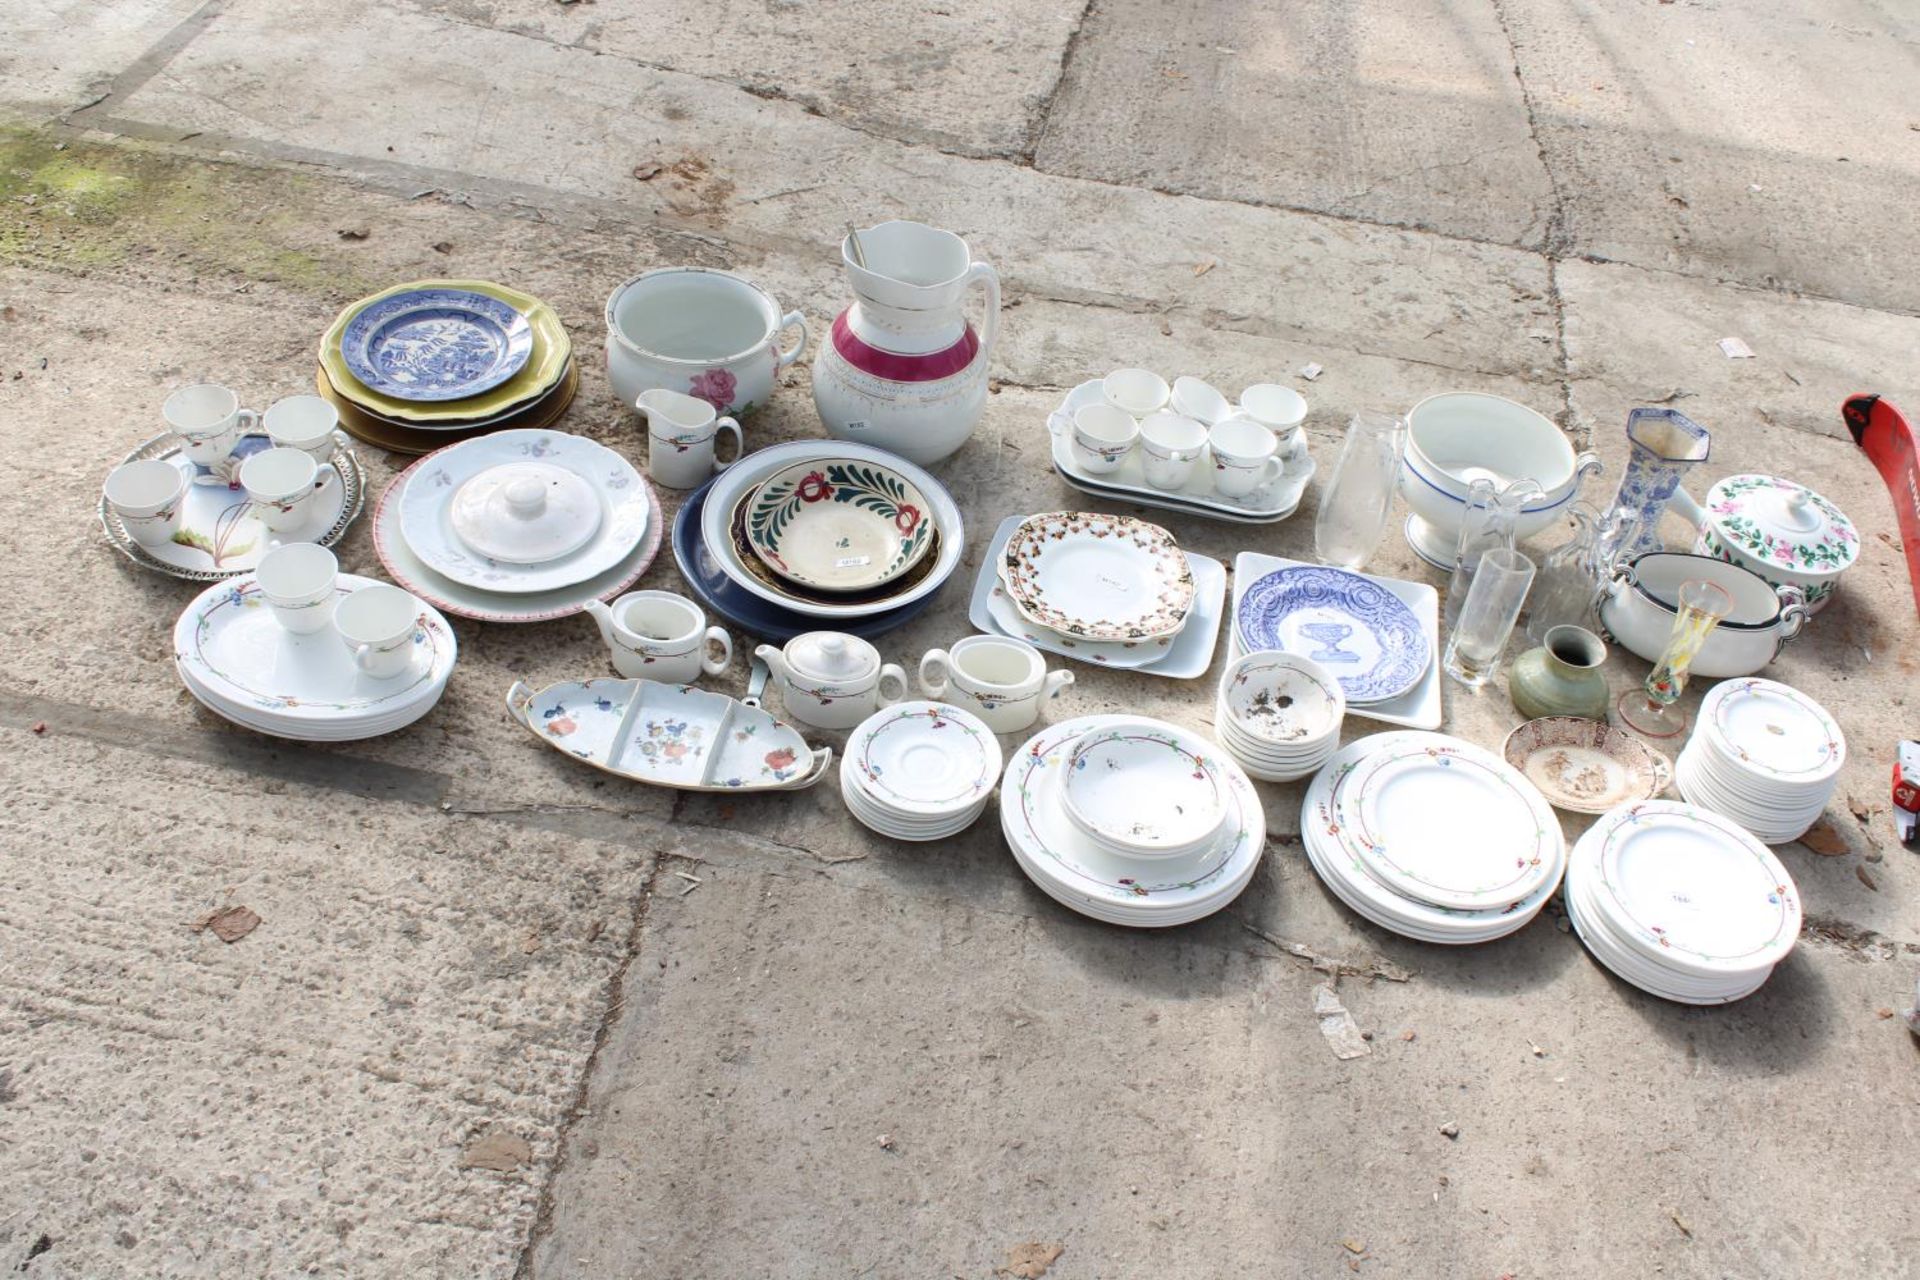 A LARGE ASSORTMENT OF CERAMICS AND GLASS WARE TO INCLUDE PLATES, BOWLS AND A JUG ETC